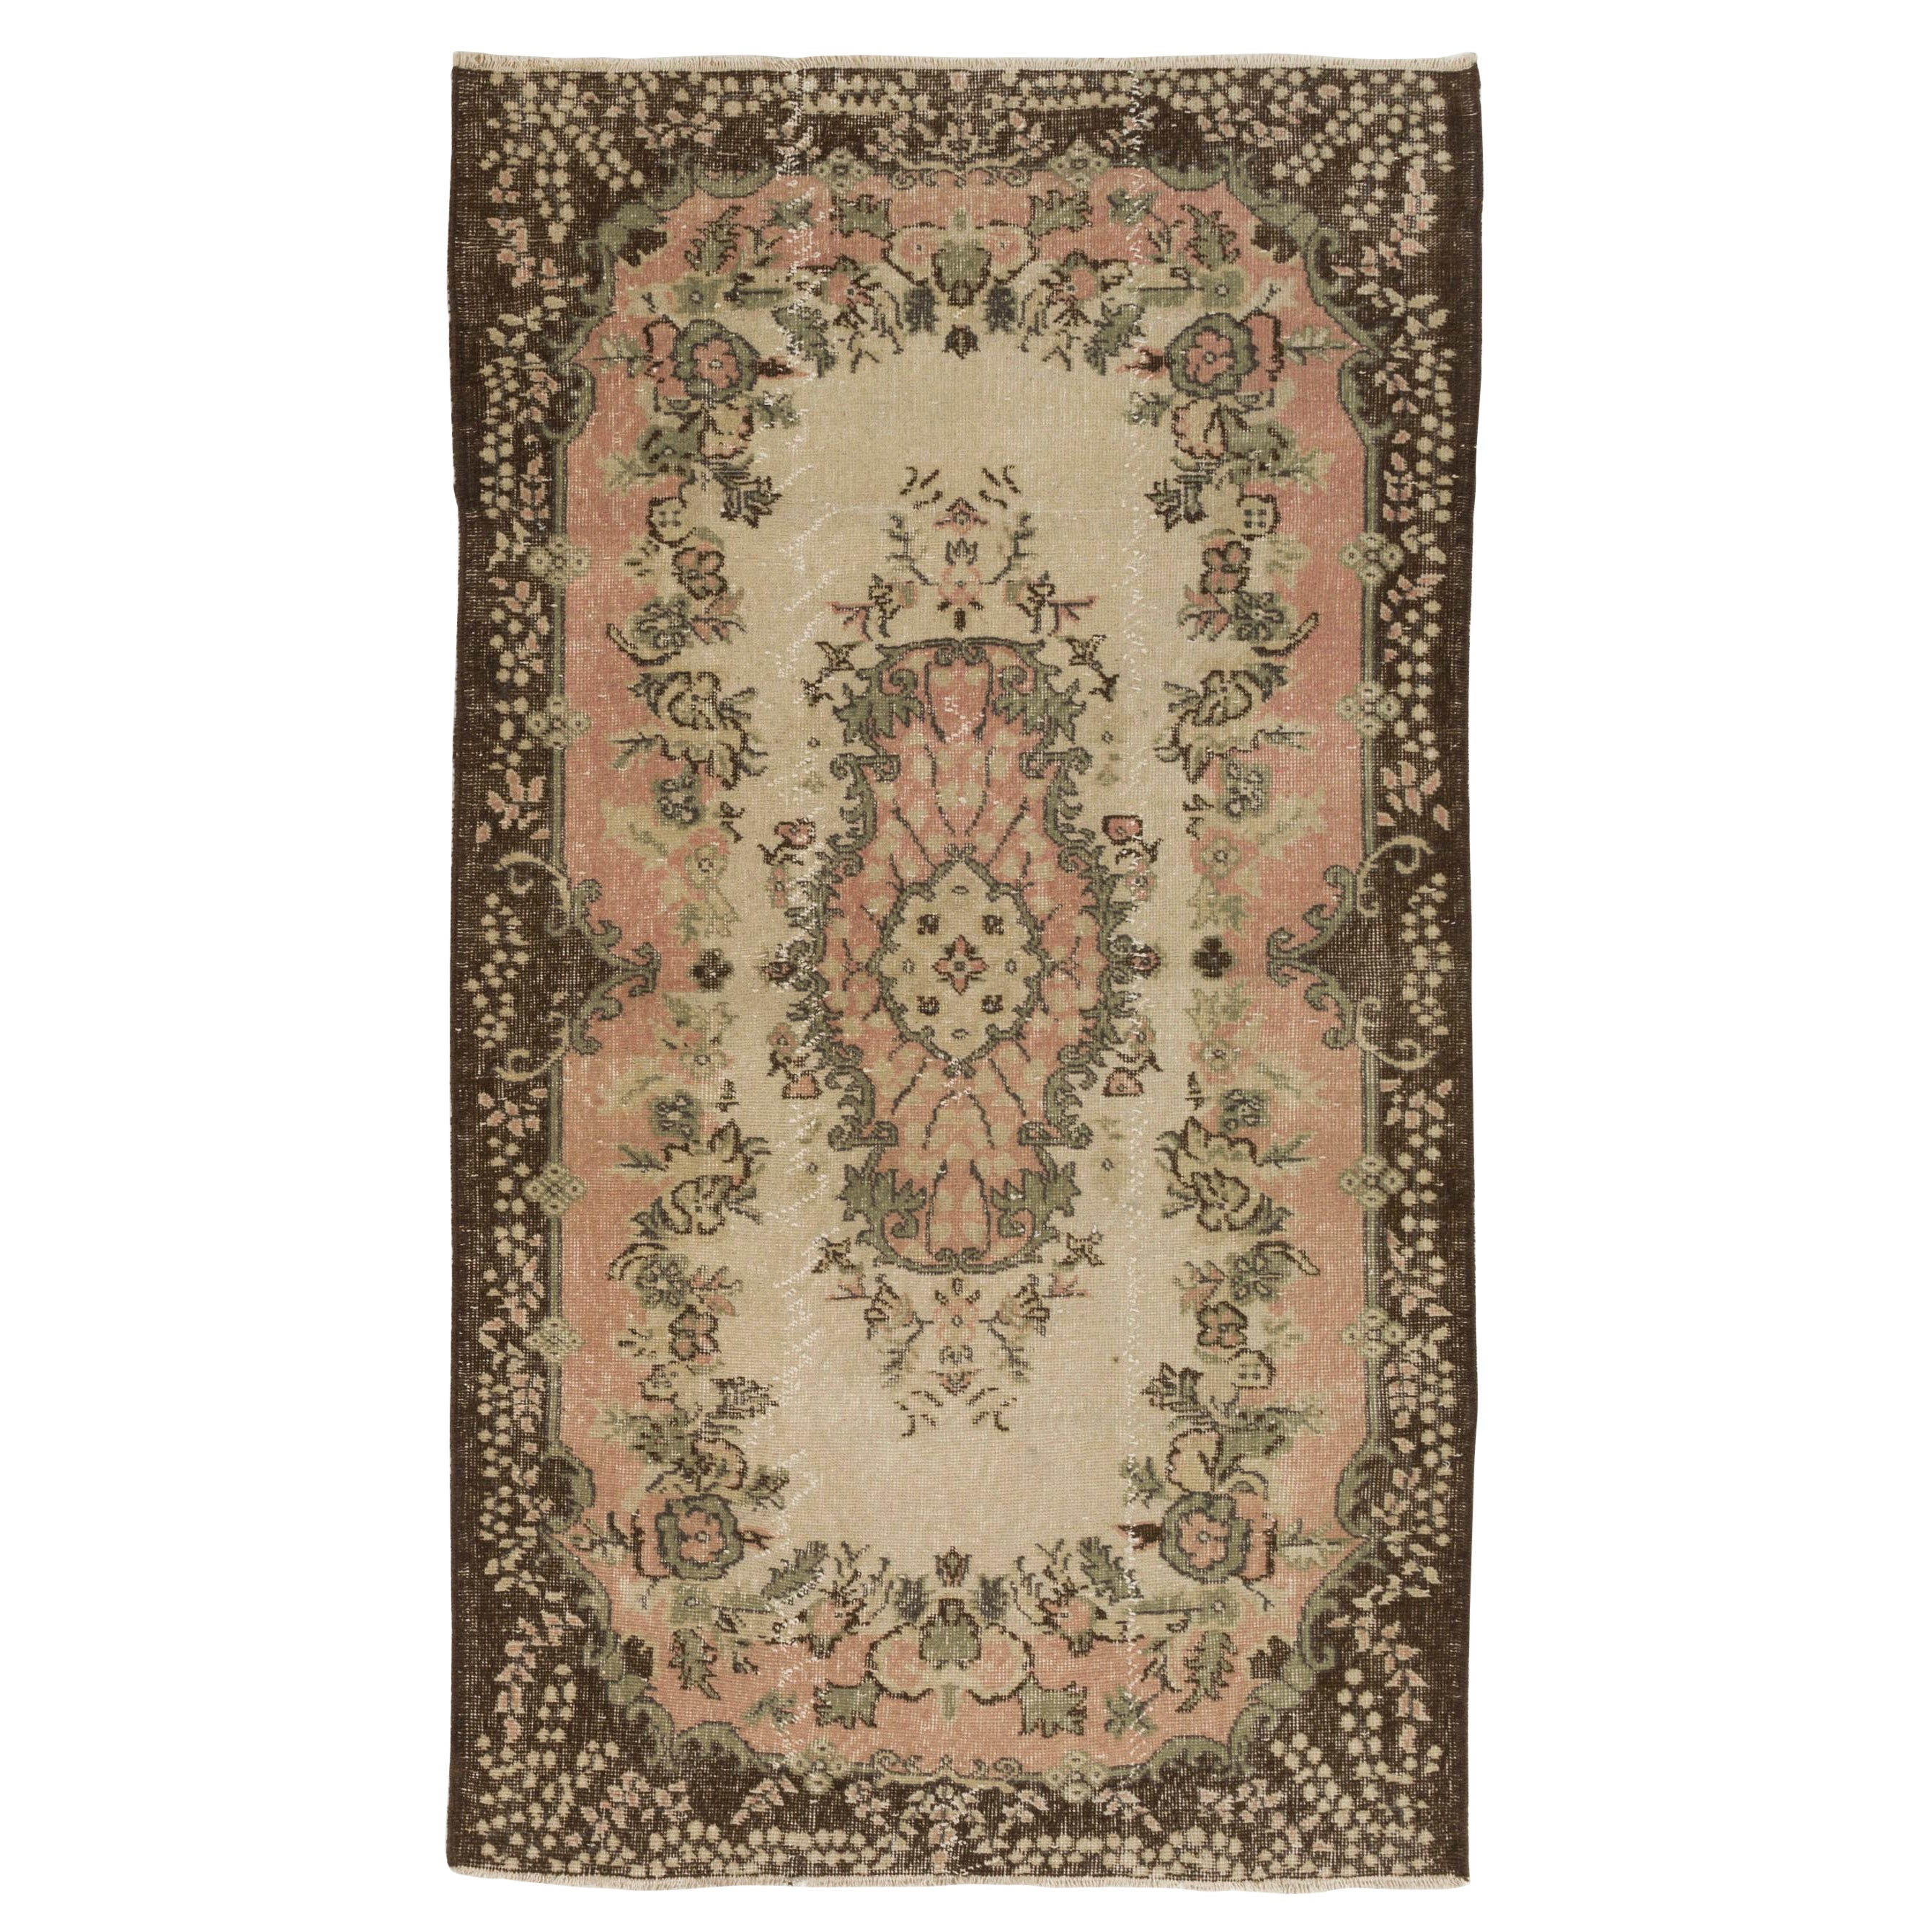 4x7.2 Ft Vintage Hand-Knotted Turkish Rug in Beige, Green, Pink & Brown Colors